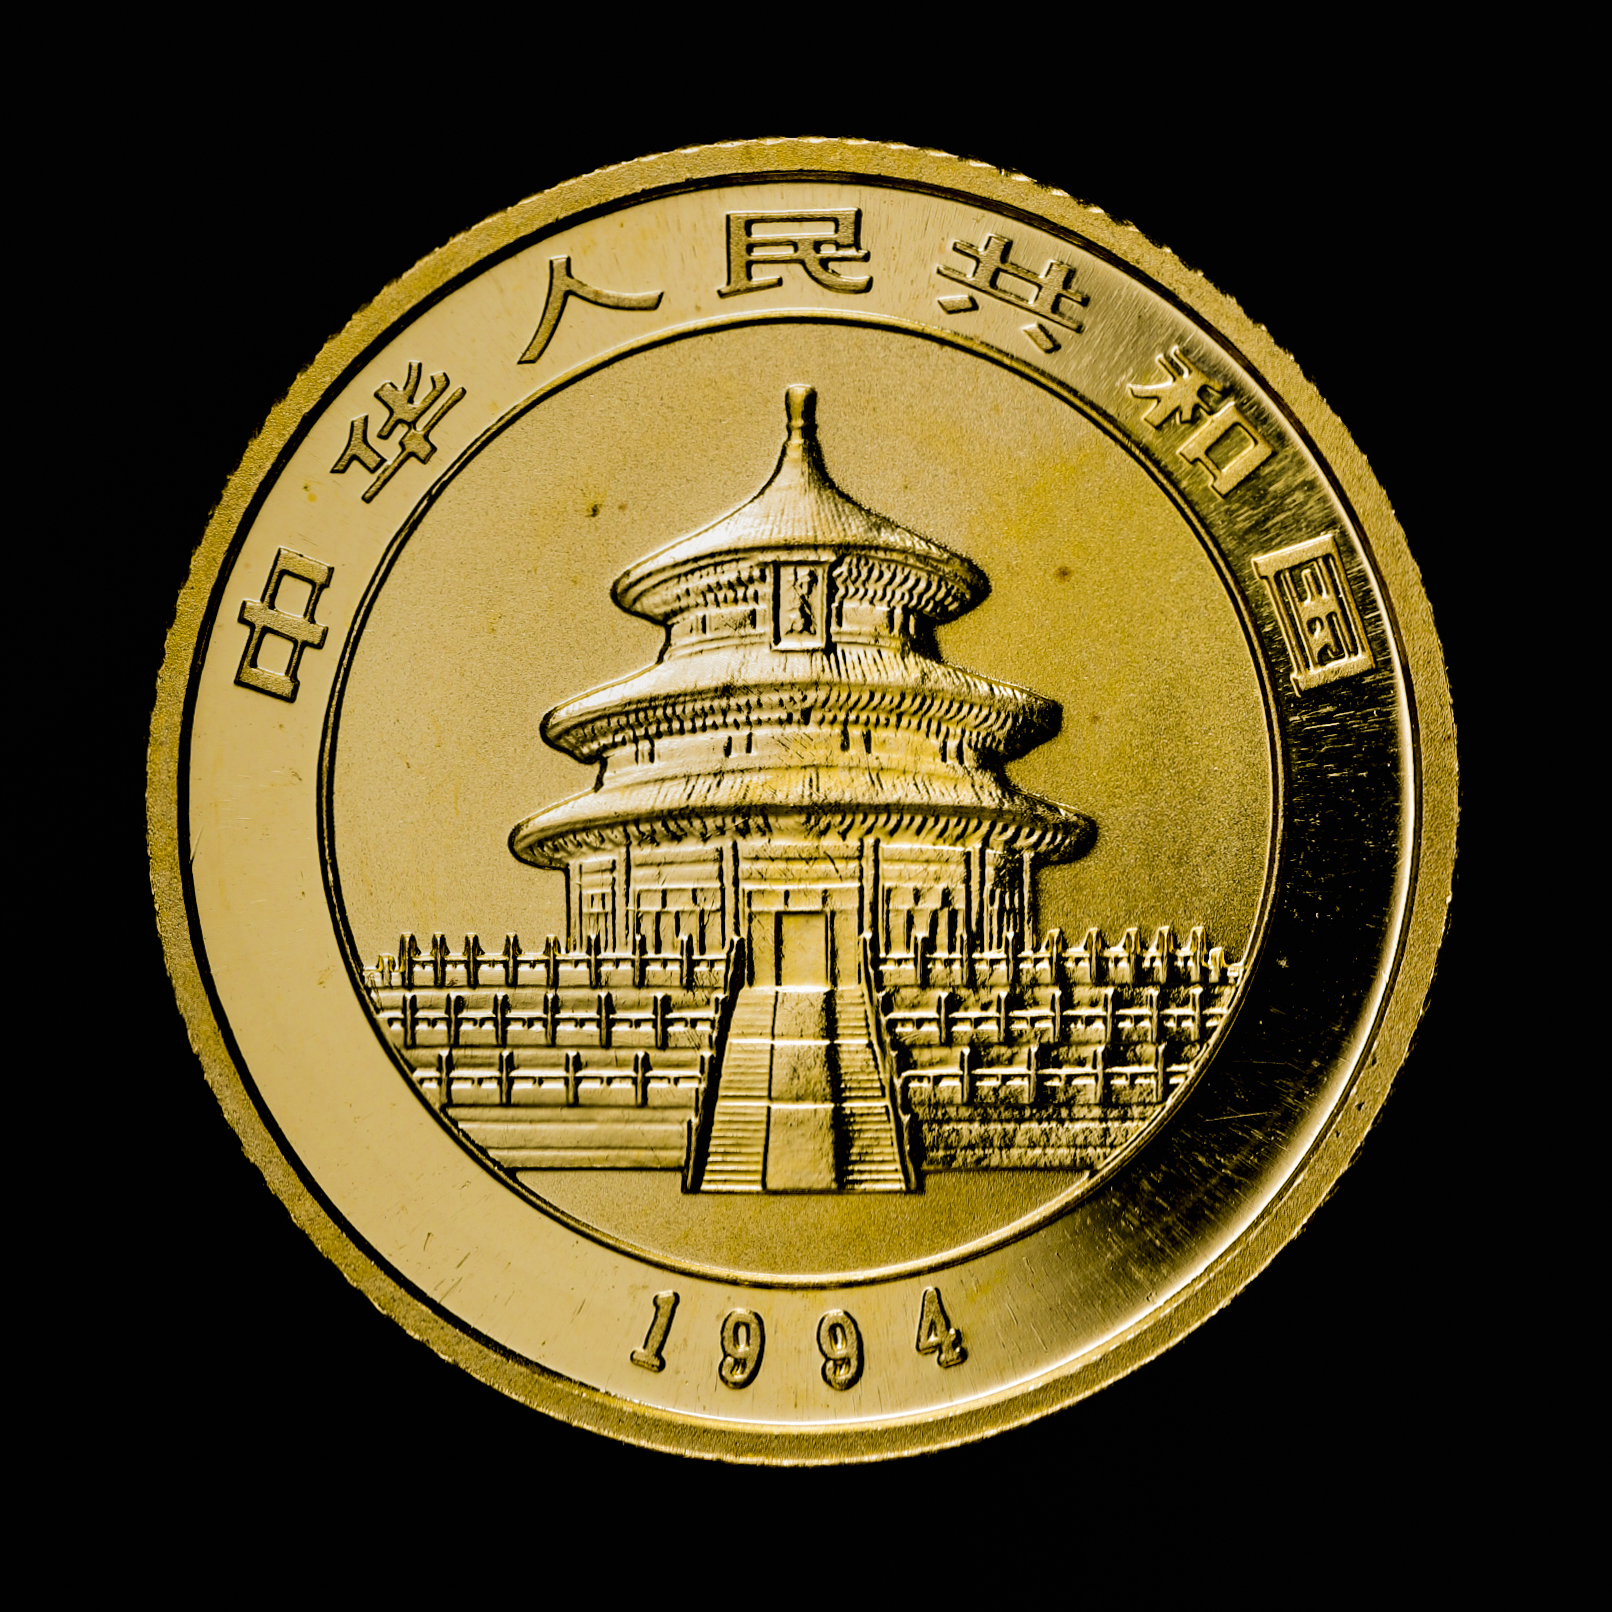 Coin Museum | 中華人民共和国 People's Republic of China 10元（Yuan） 1994 パンダ 1/10オンス（ 1/10Oz） 金貨 大年号 Large Date 返品不可 Sold as is No returns